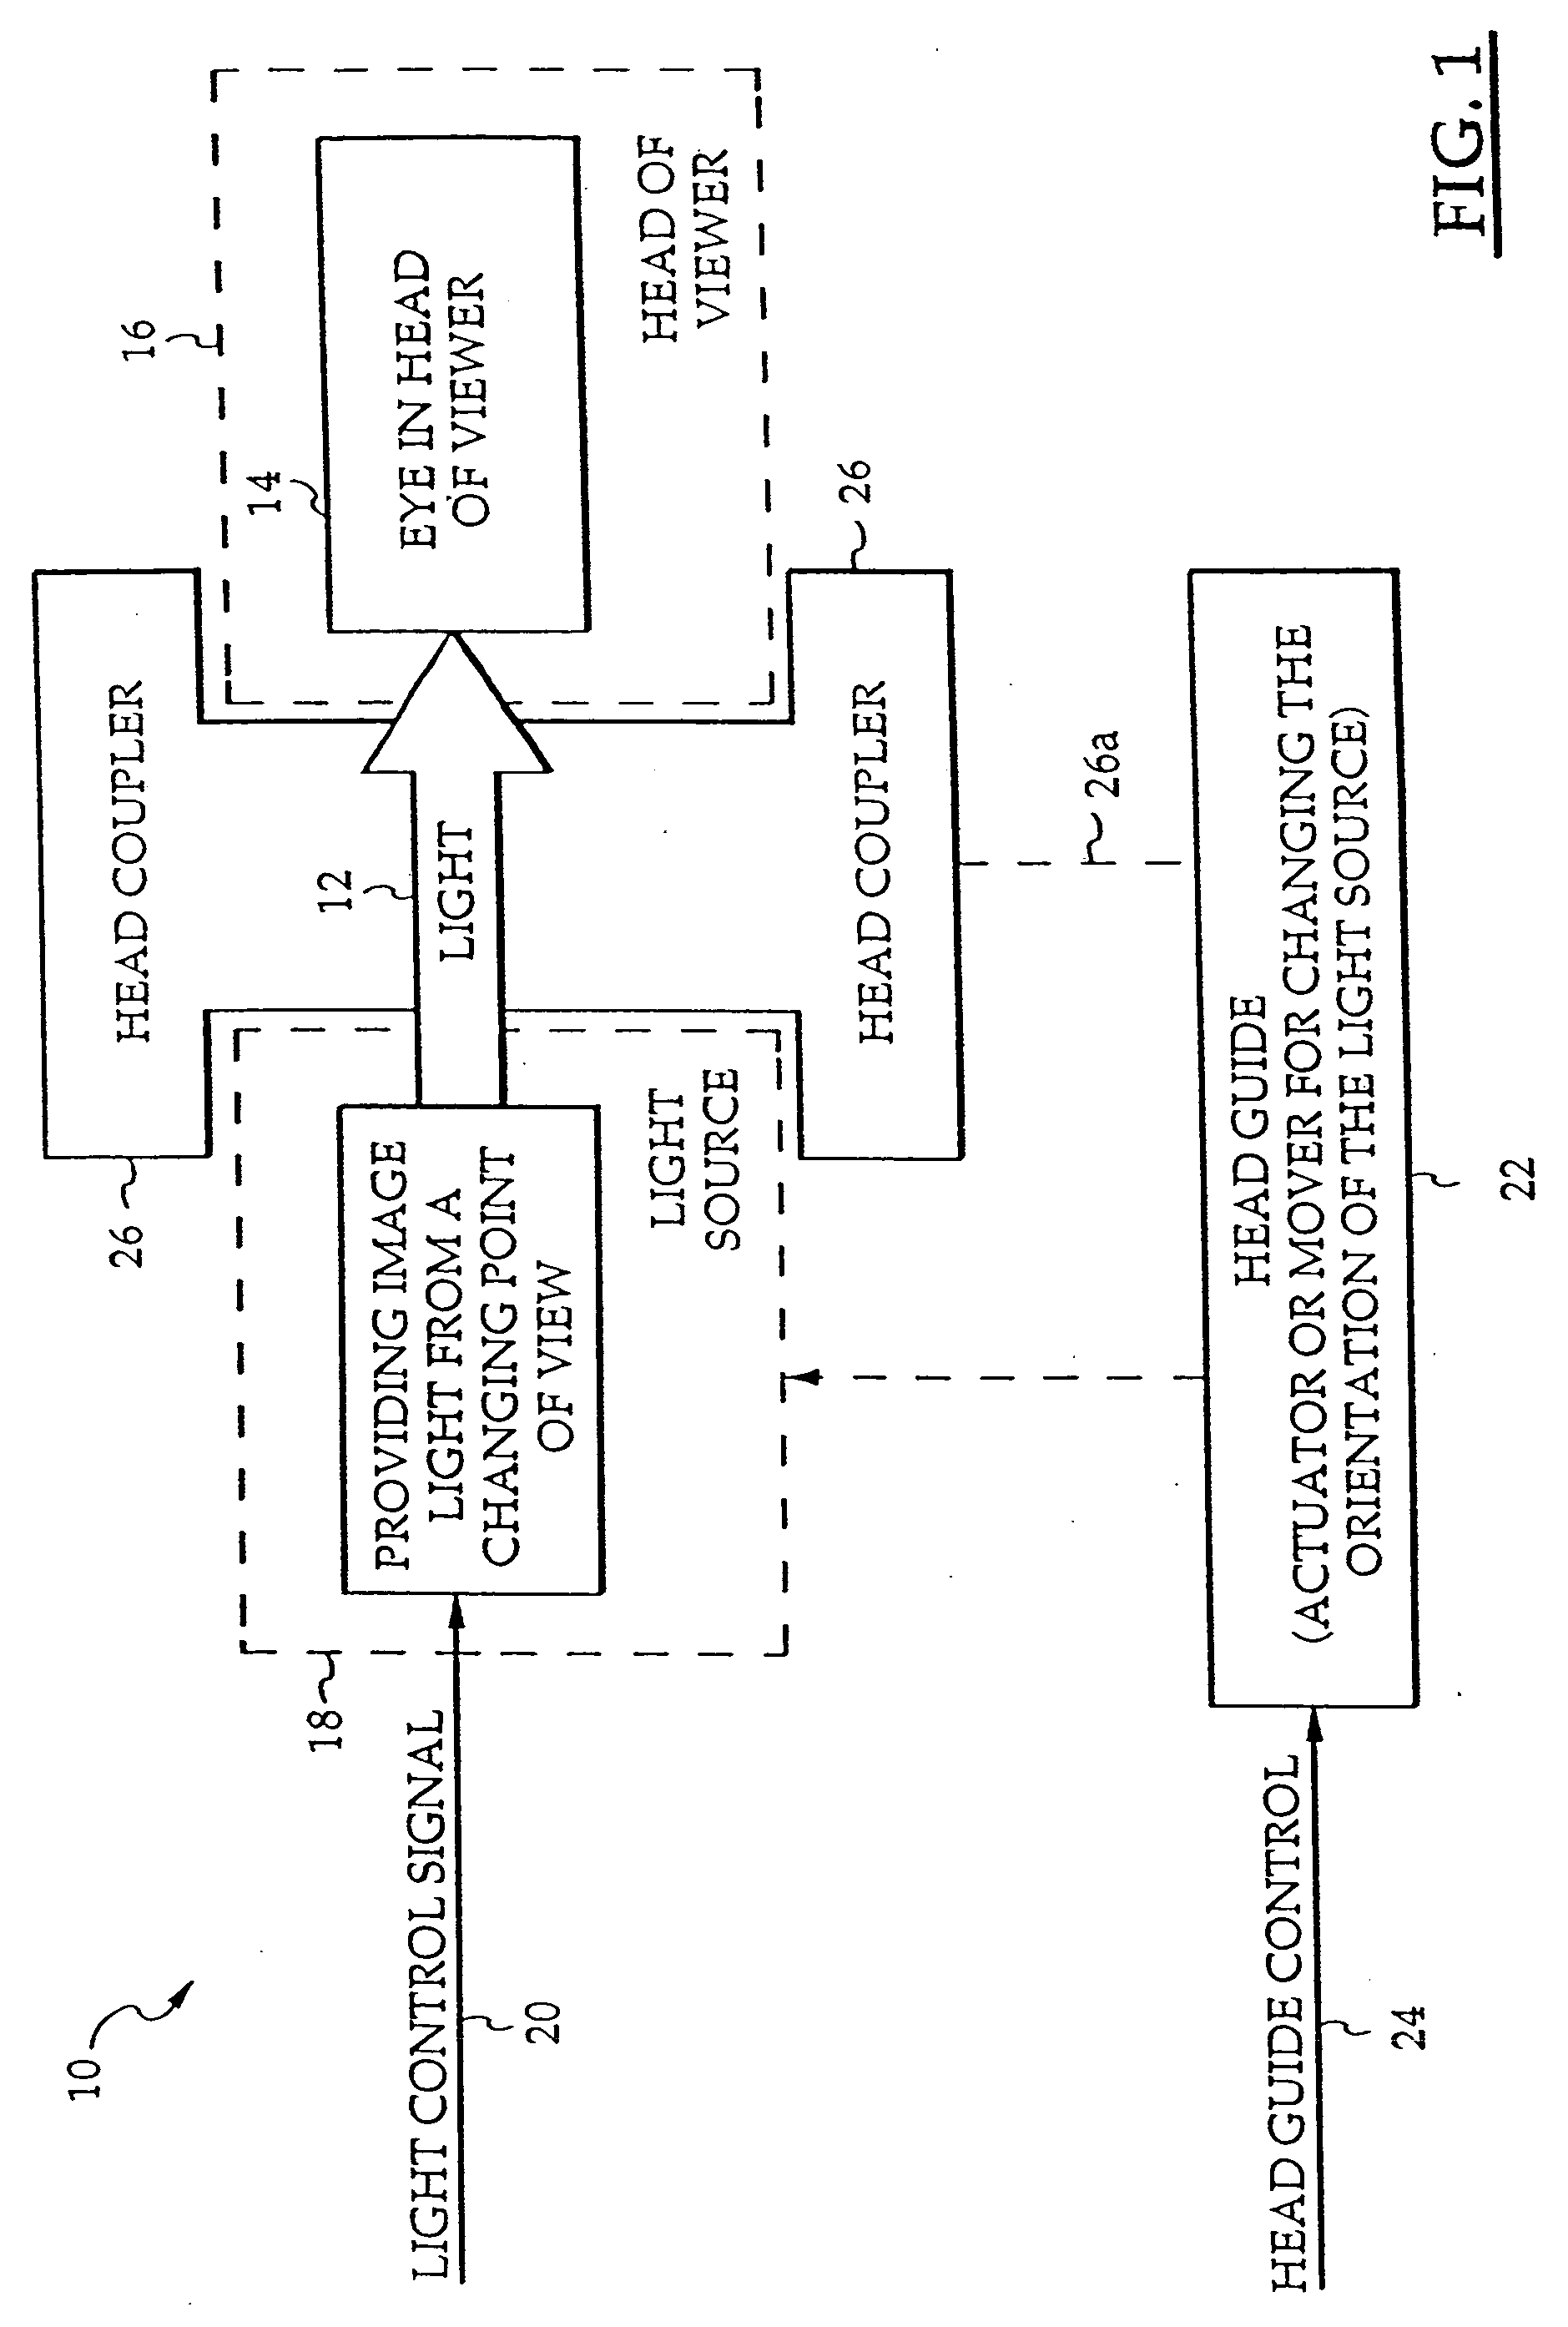 Apparatus for inducing attitudinal head movements for passive virtual reality